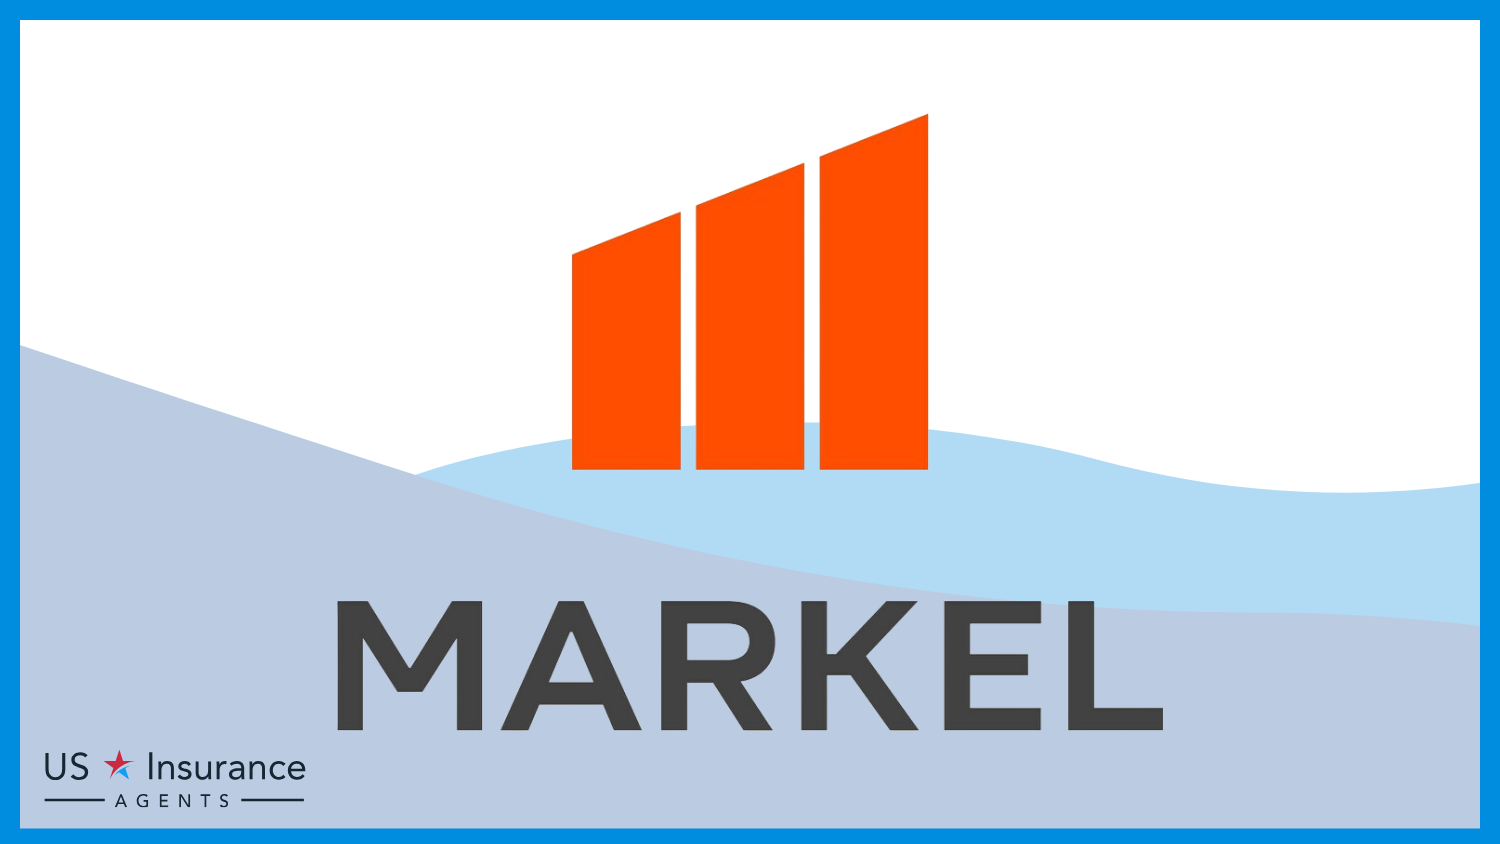 Markel: Best Business Insurance for Equine Therapy Companies